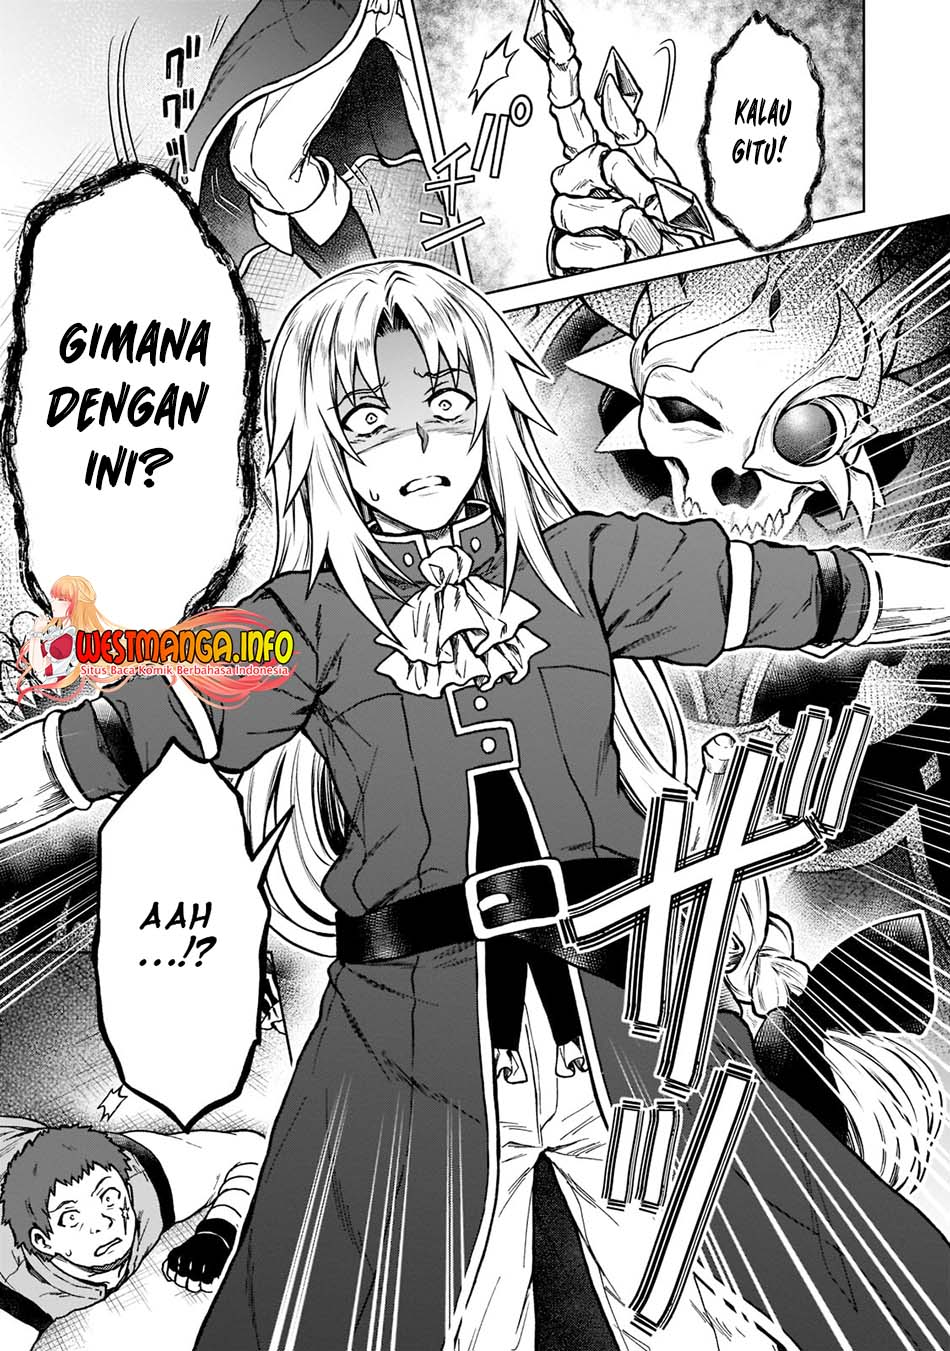 Dilarang COPAS - situs resmi www.mangacanblog.com - Komik d rank adventurer invited by a brave party and the stalking princess 011 - chapter 11 12 Indonesia d rank adventurer invited by a brave party and the stalking princess 011 - chapter 11 Terbaru 6|Baca Manga Komik Indonesia|Mangacan